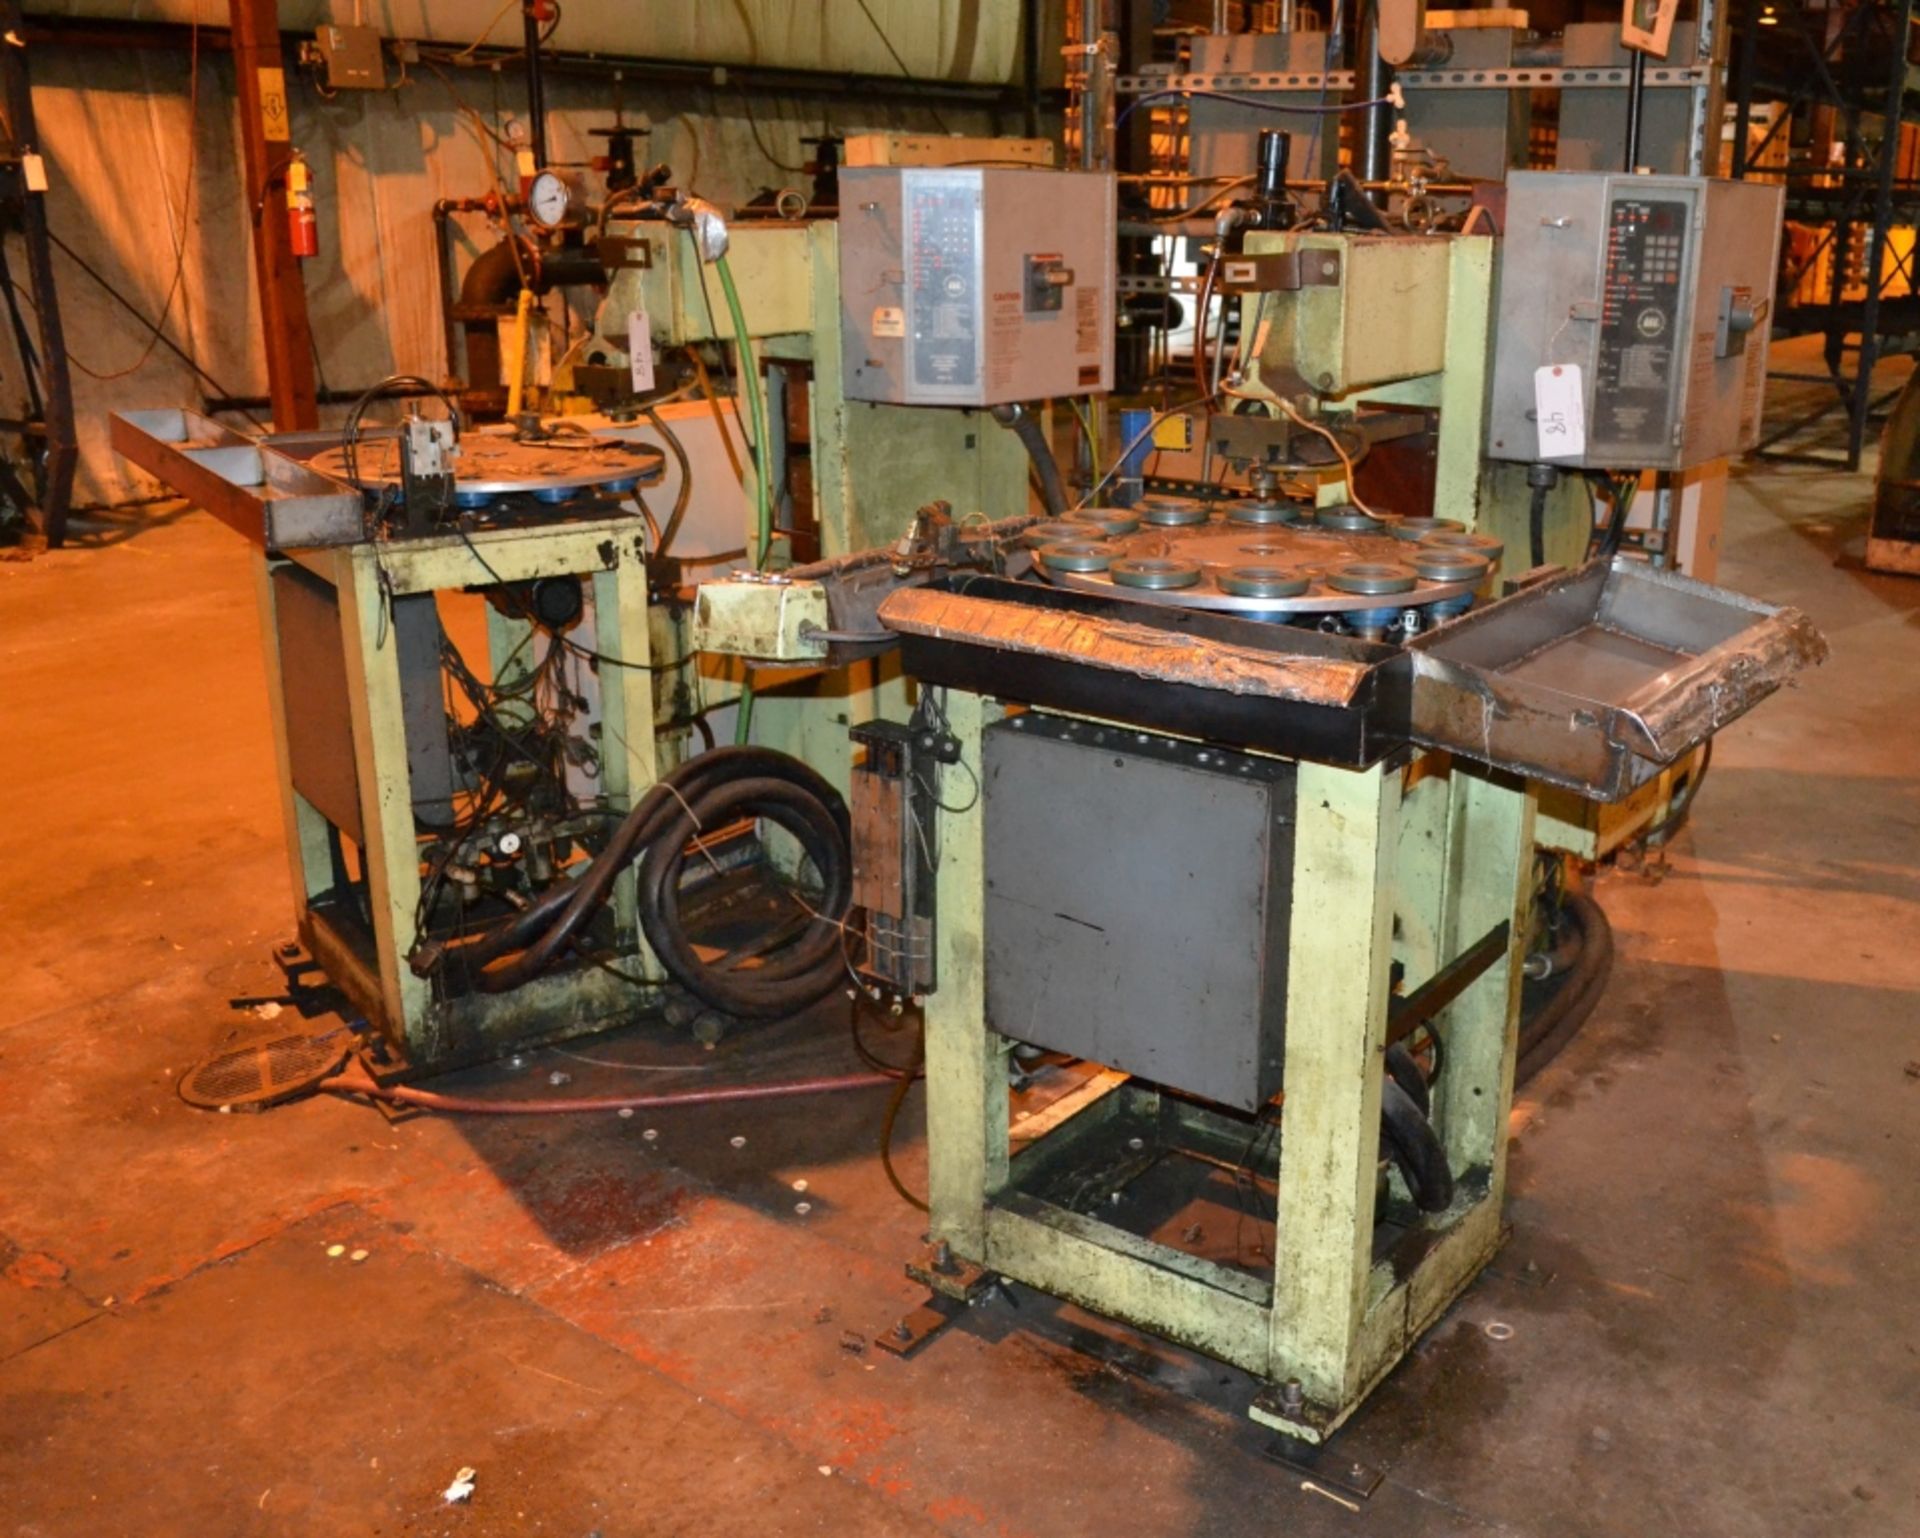 Lot Consisting of: (2) 75-KVA Spot Welders, with Intertron Solid State Controls, and 12-Position